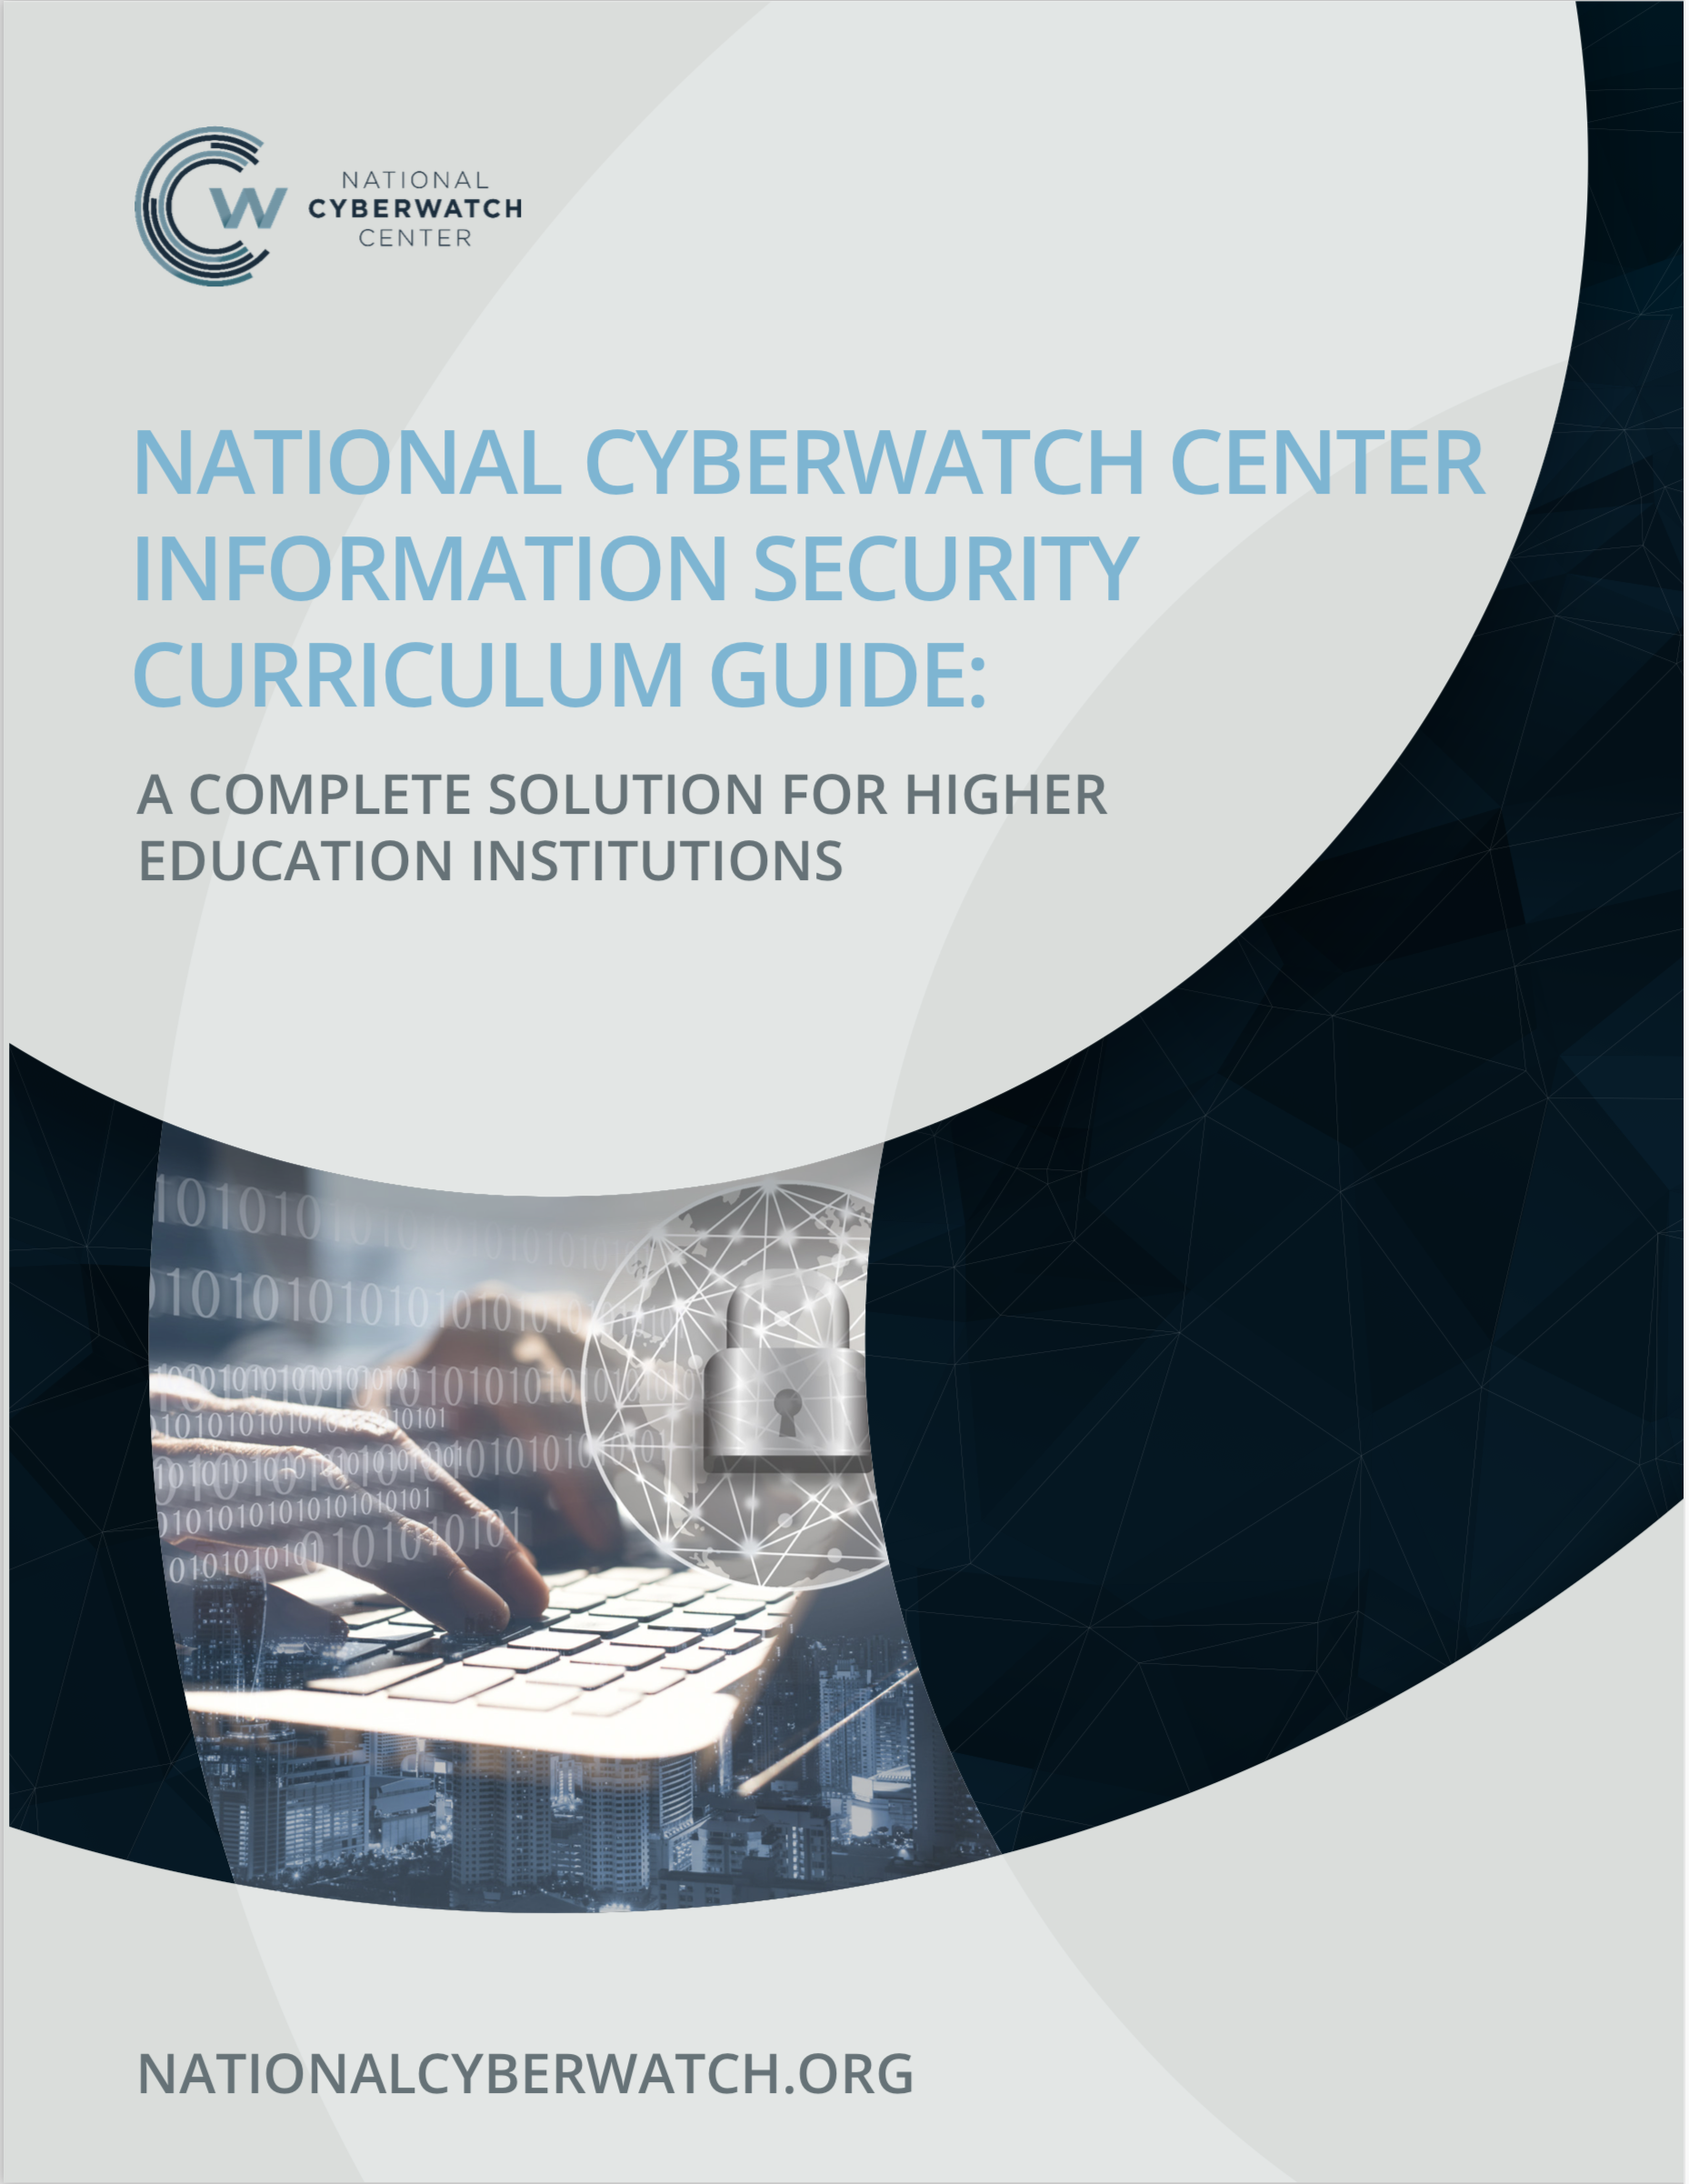 National CyberWatch’s Information Security Curricula Guide: A Complete Solution for Higher Education Institutions